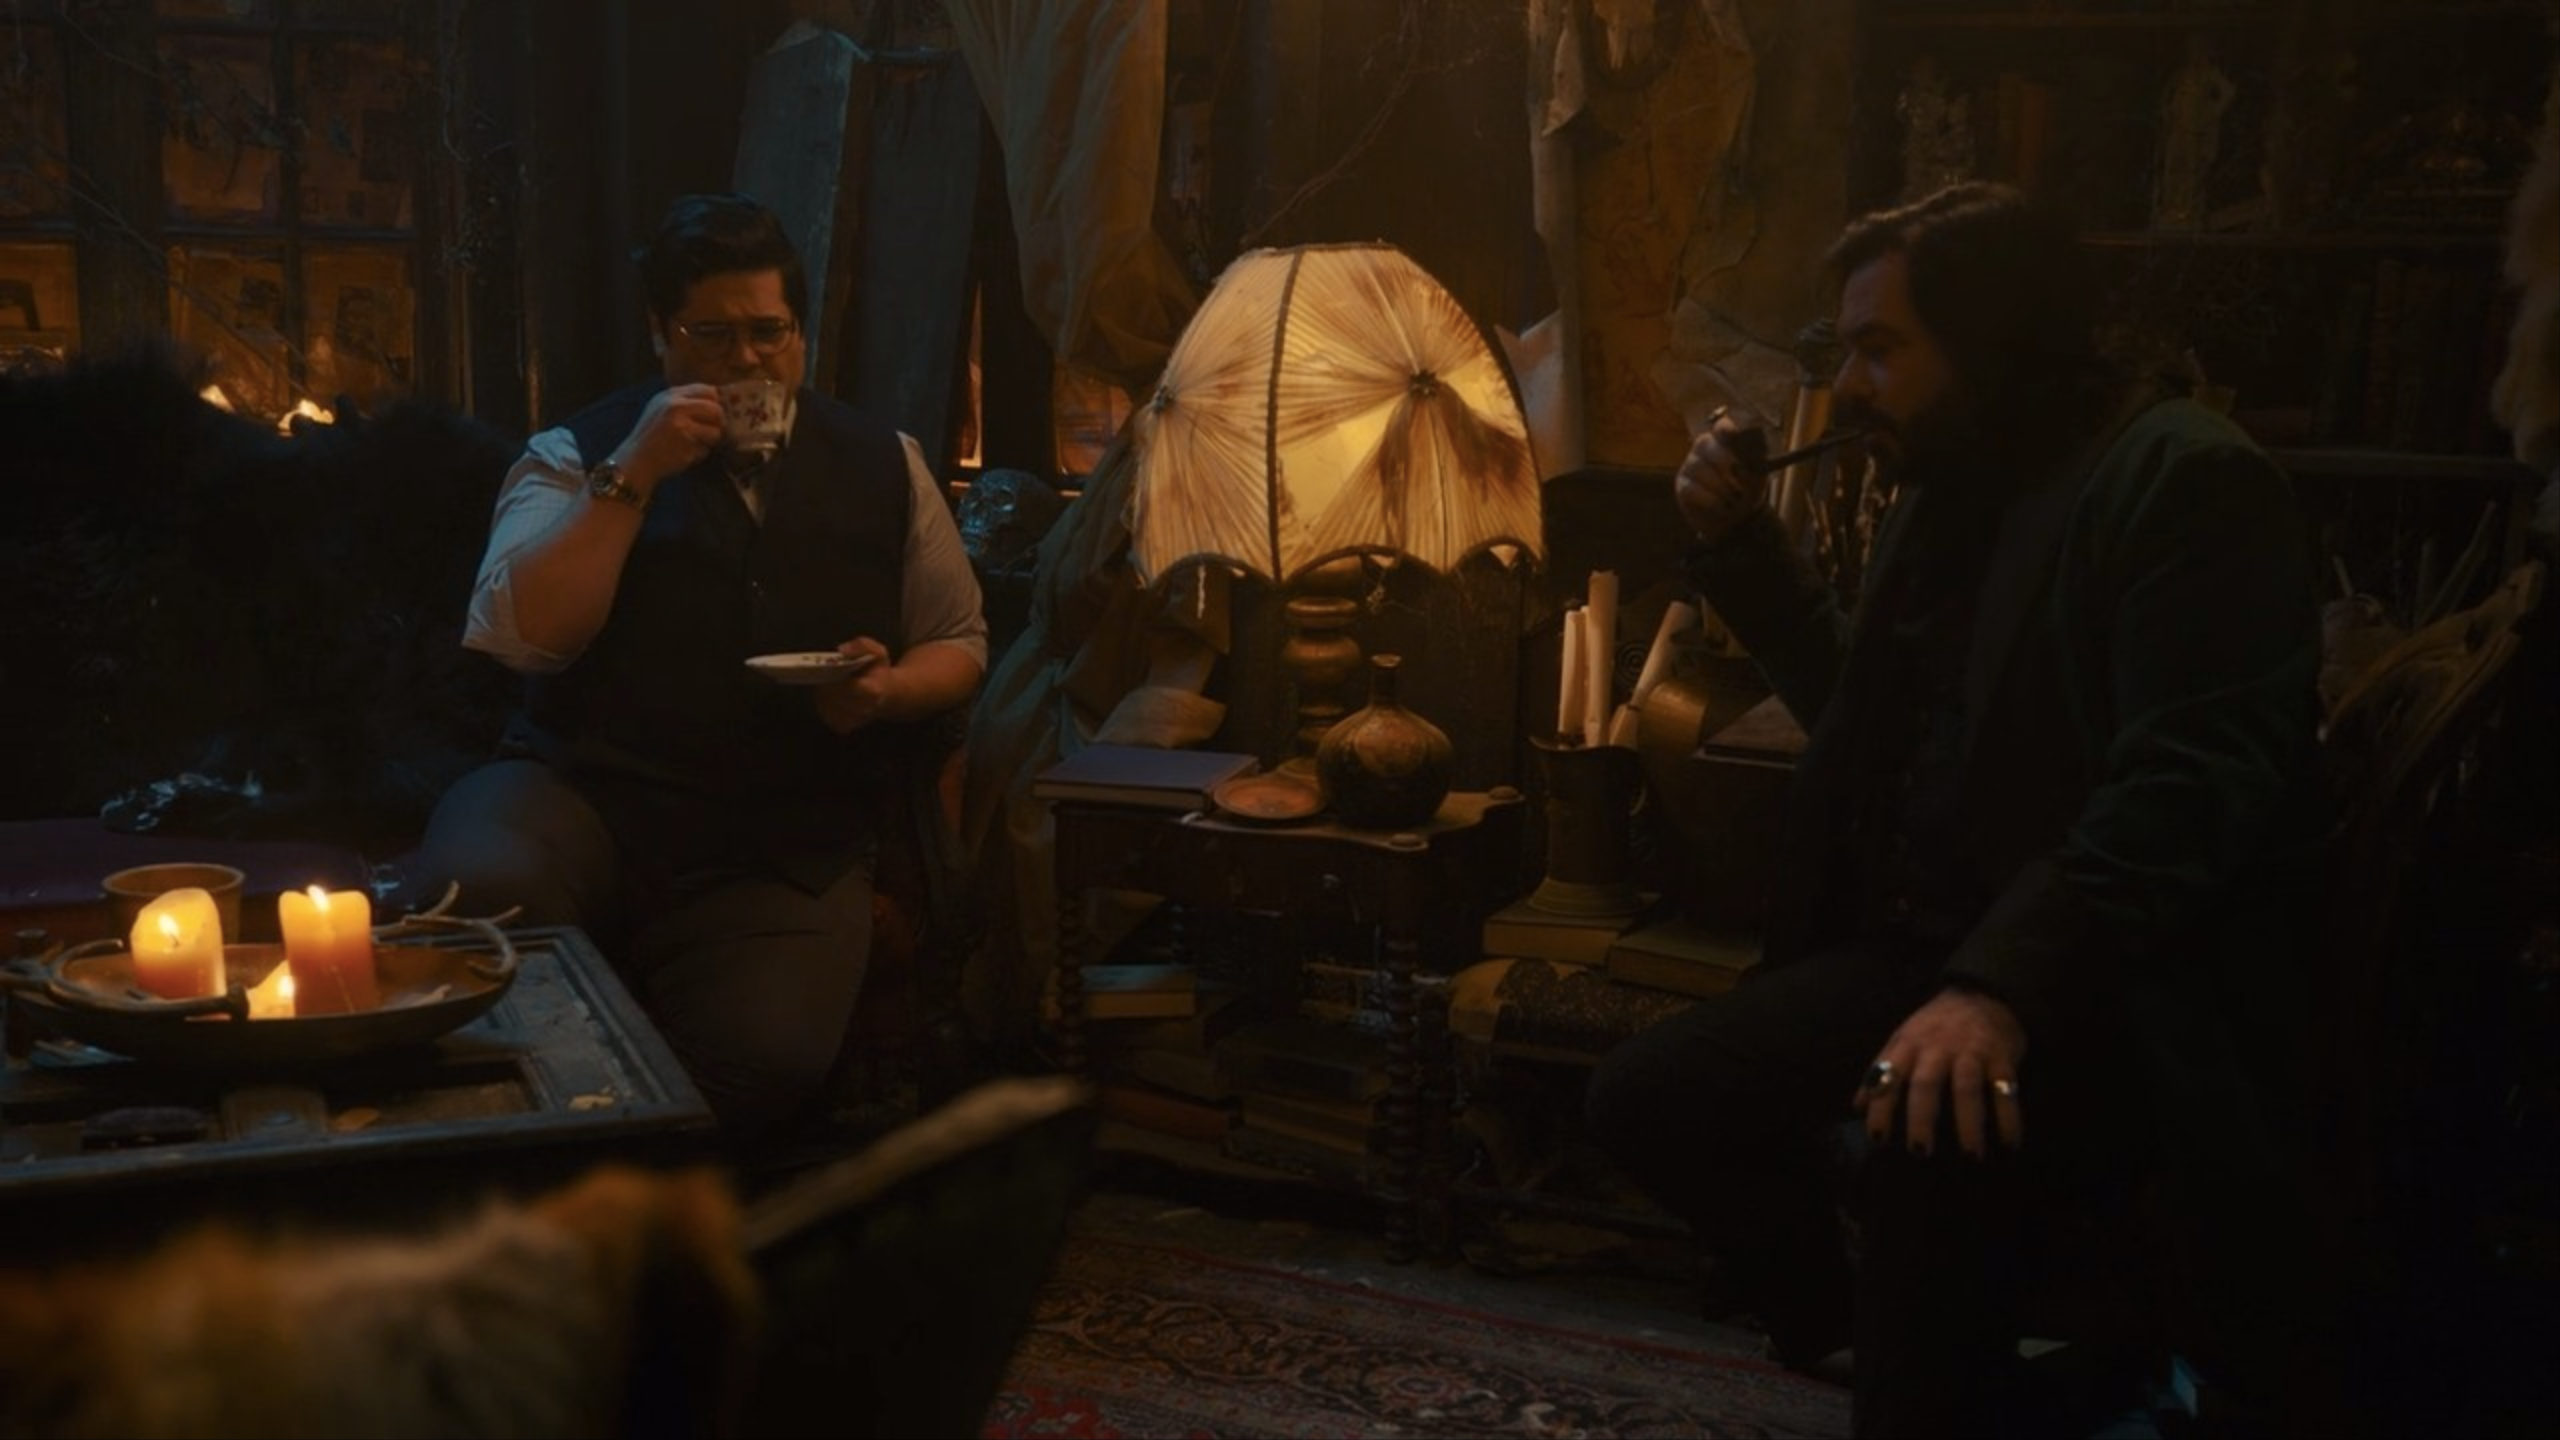 what we do in the shadows 4x10 guillermo and laszlo sip tea